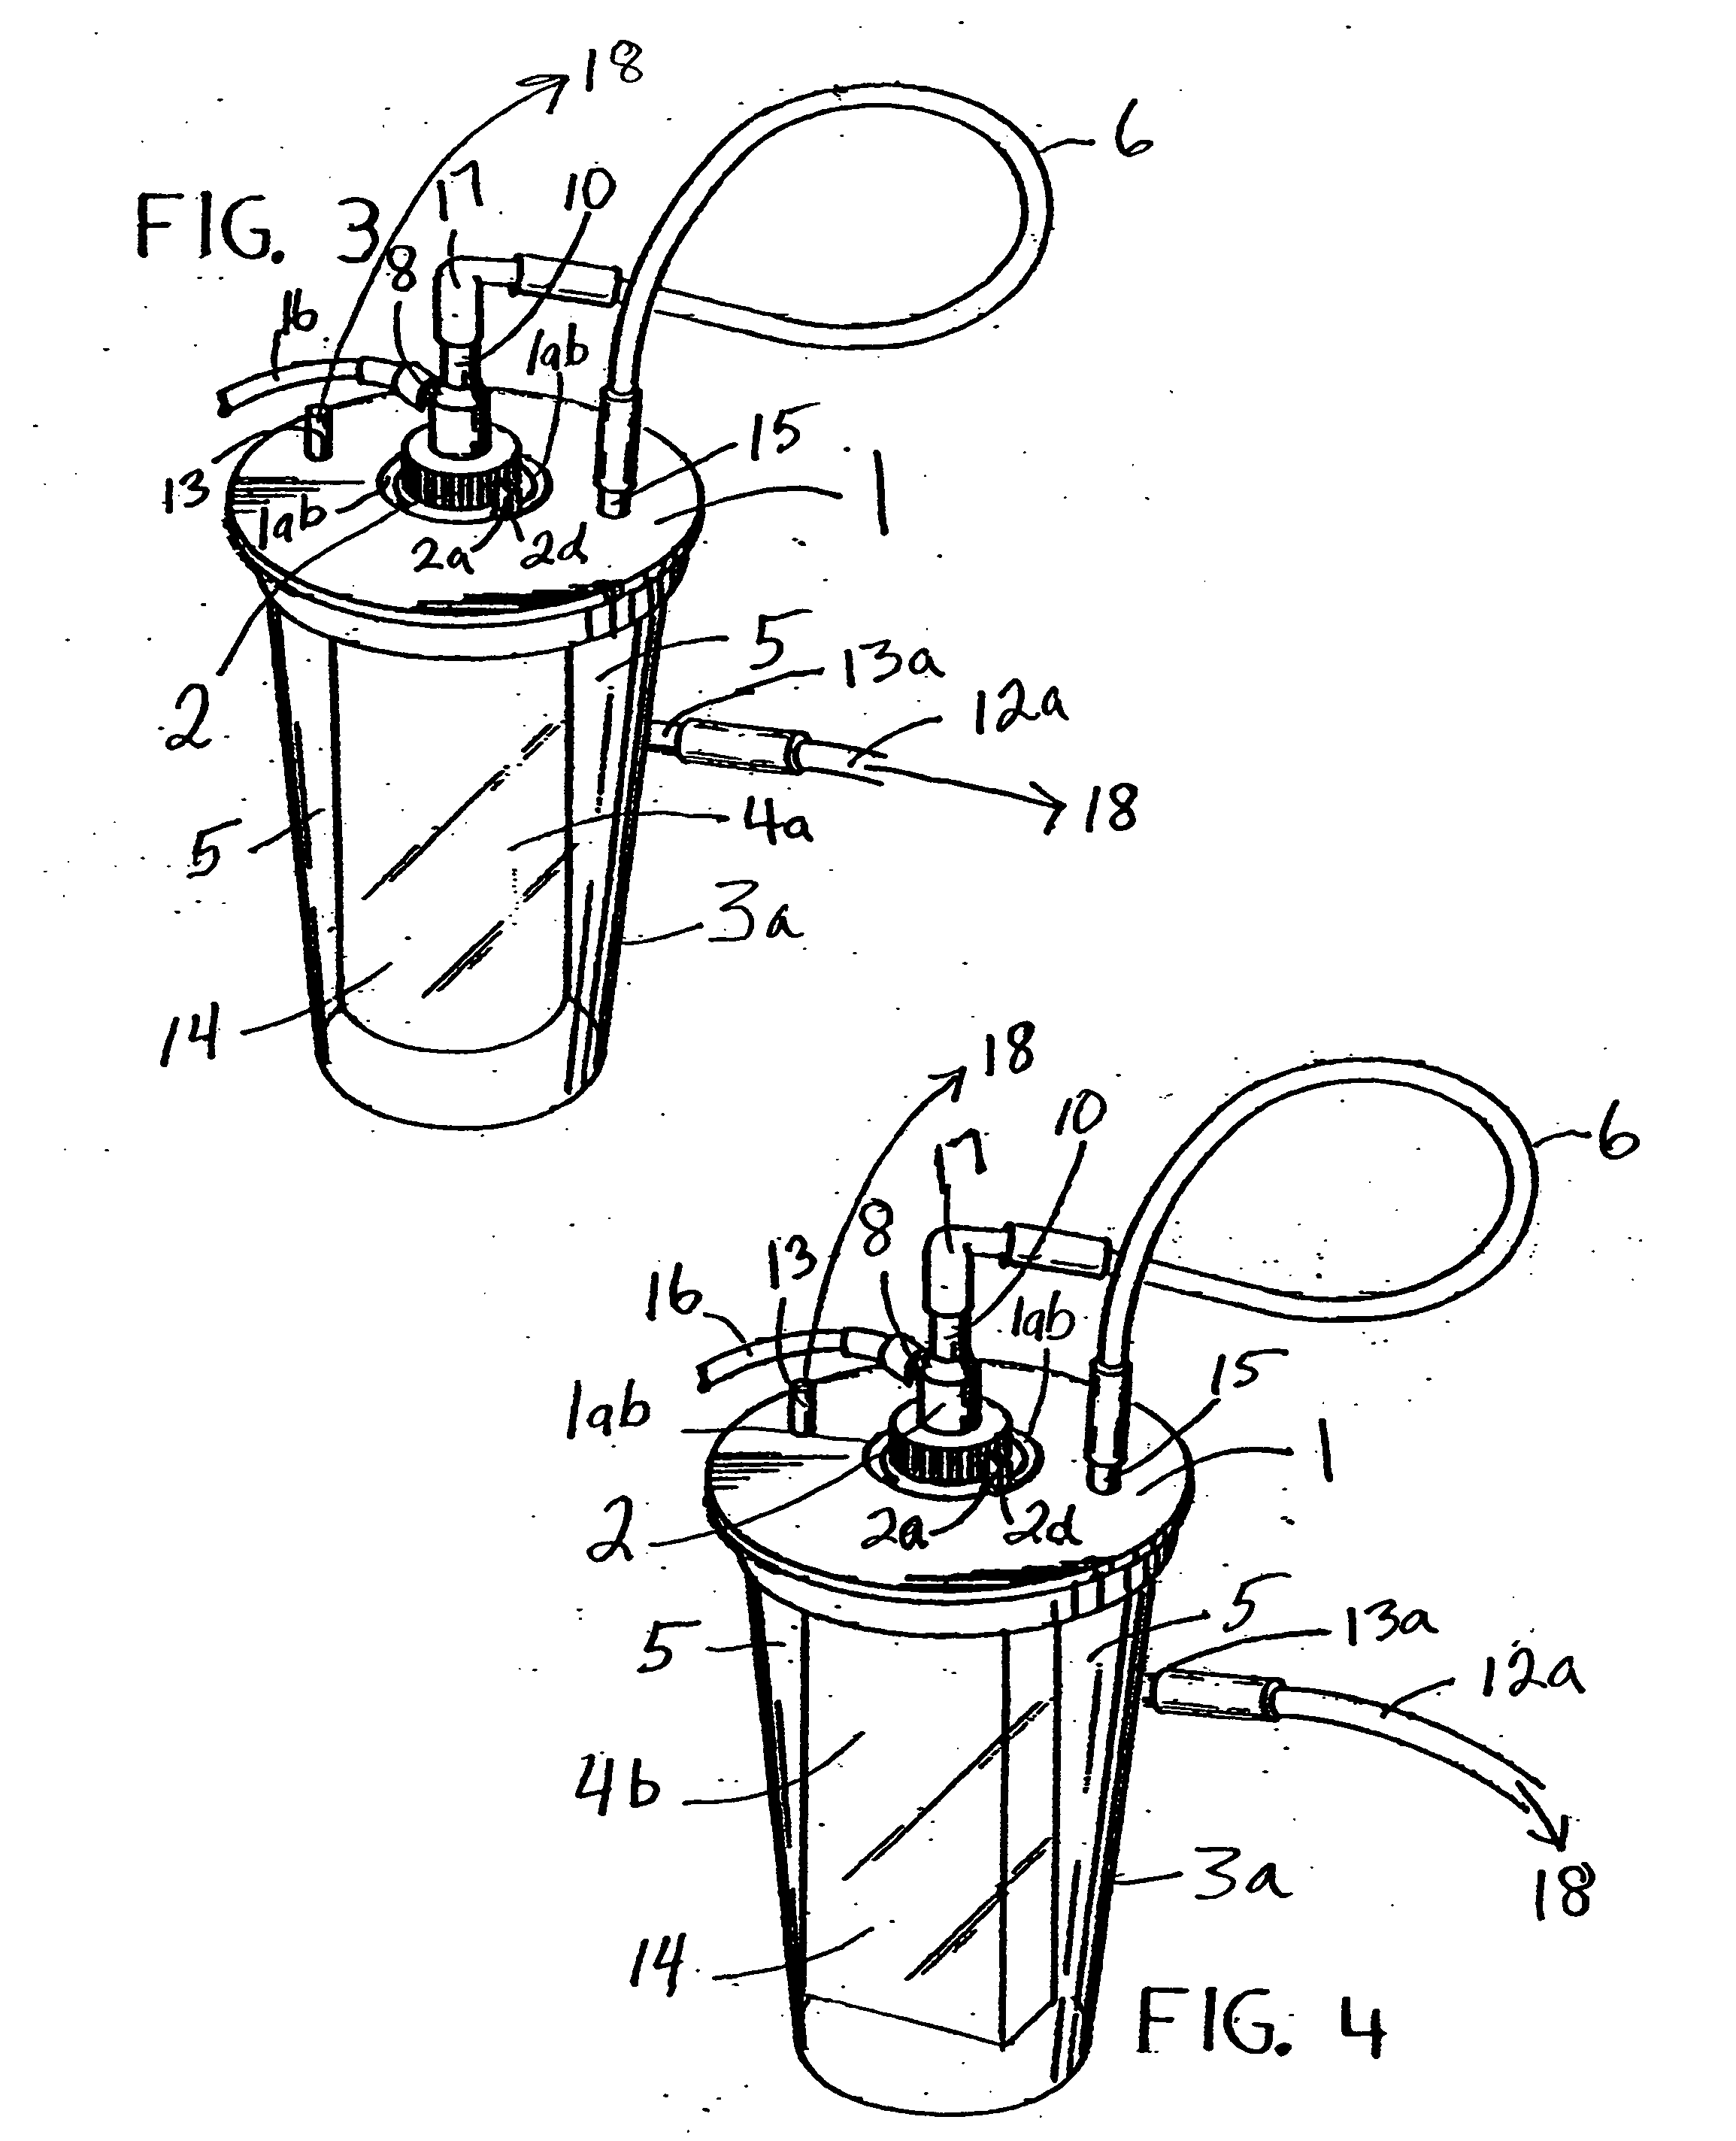 Method and apparatus for converting supplies and reducing waste